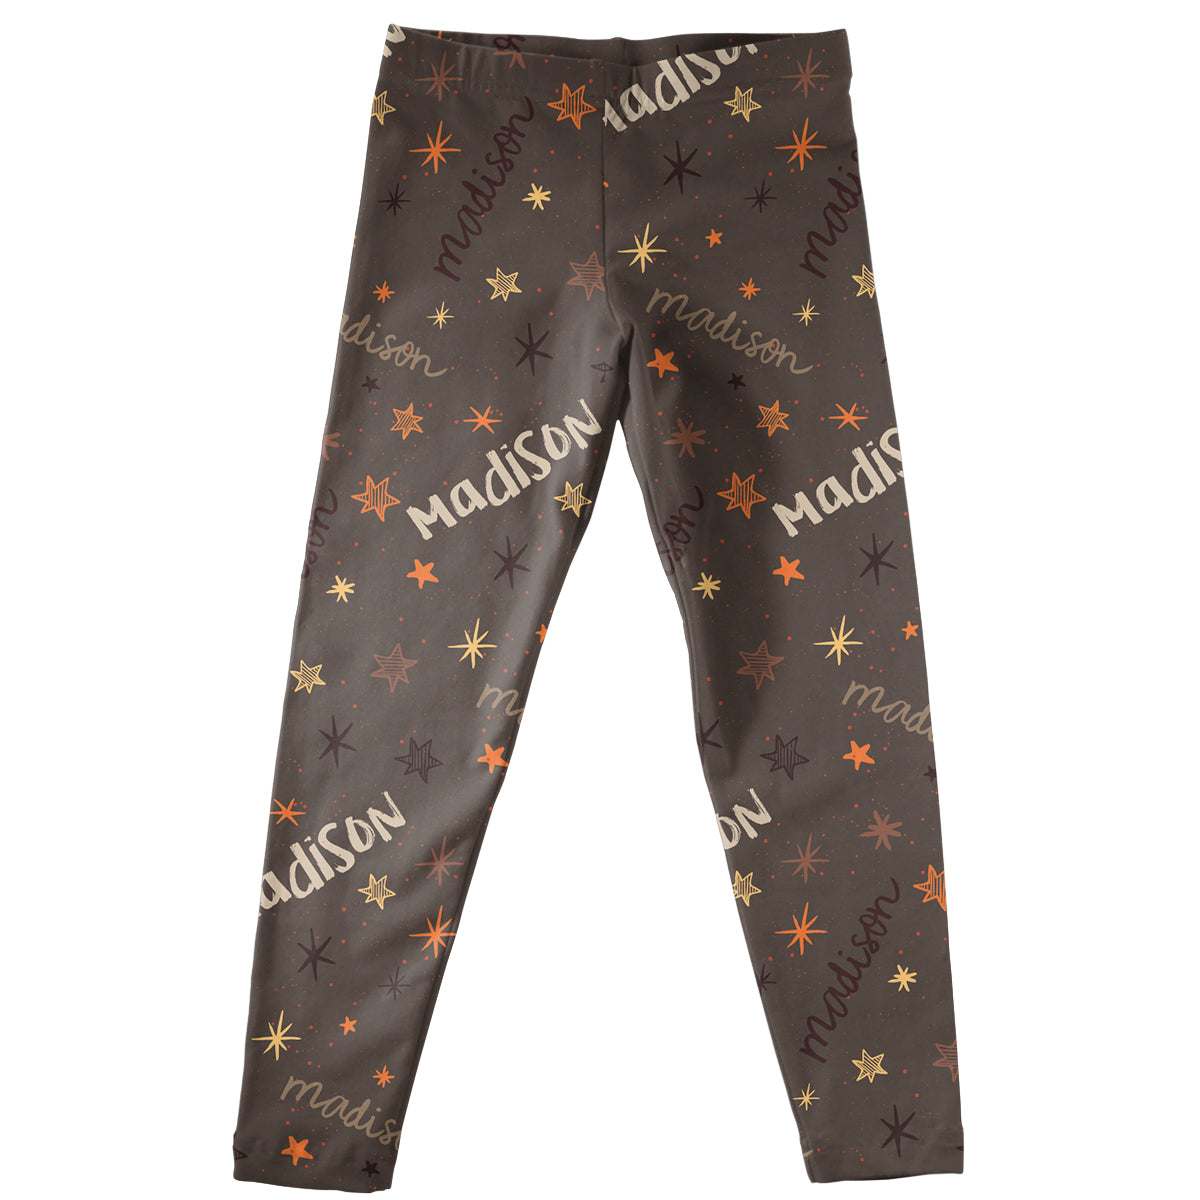 Girls brown stars leggings with name - Wimziy&Co.